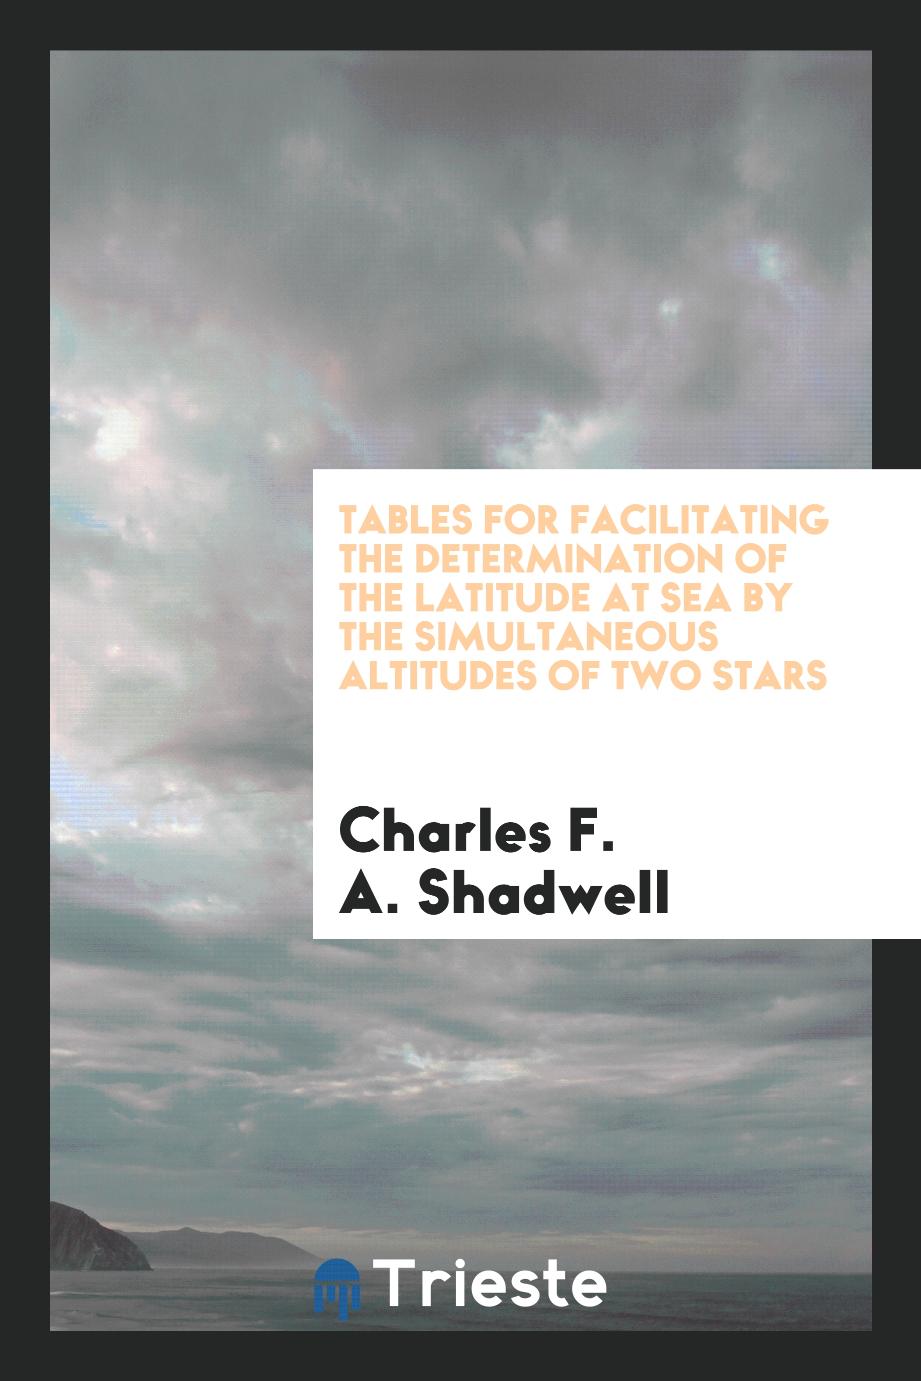 Tables for facilitating the determination of the latitude at sea by the simultaneous altitudes of two stars